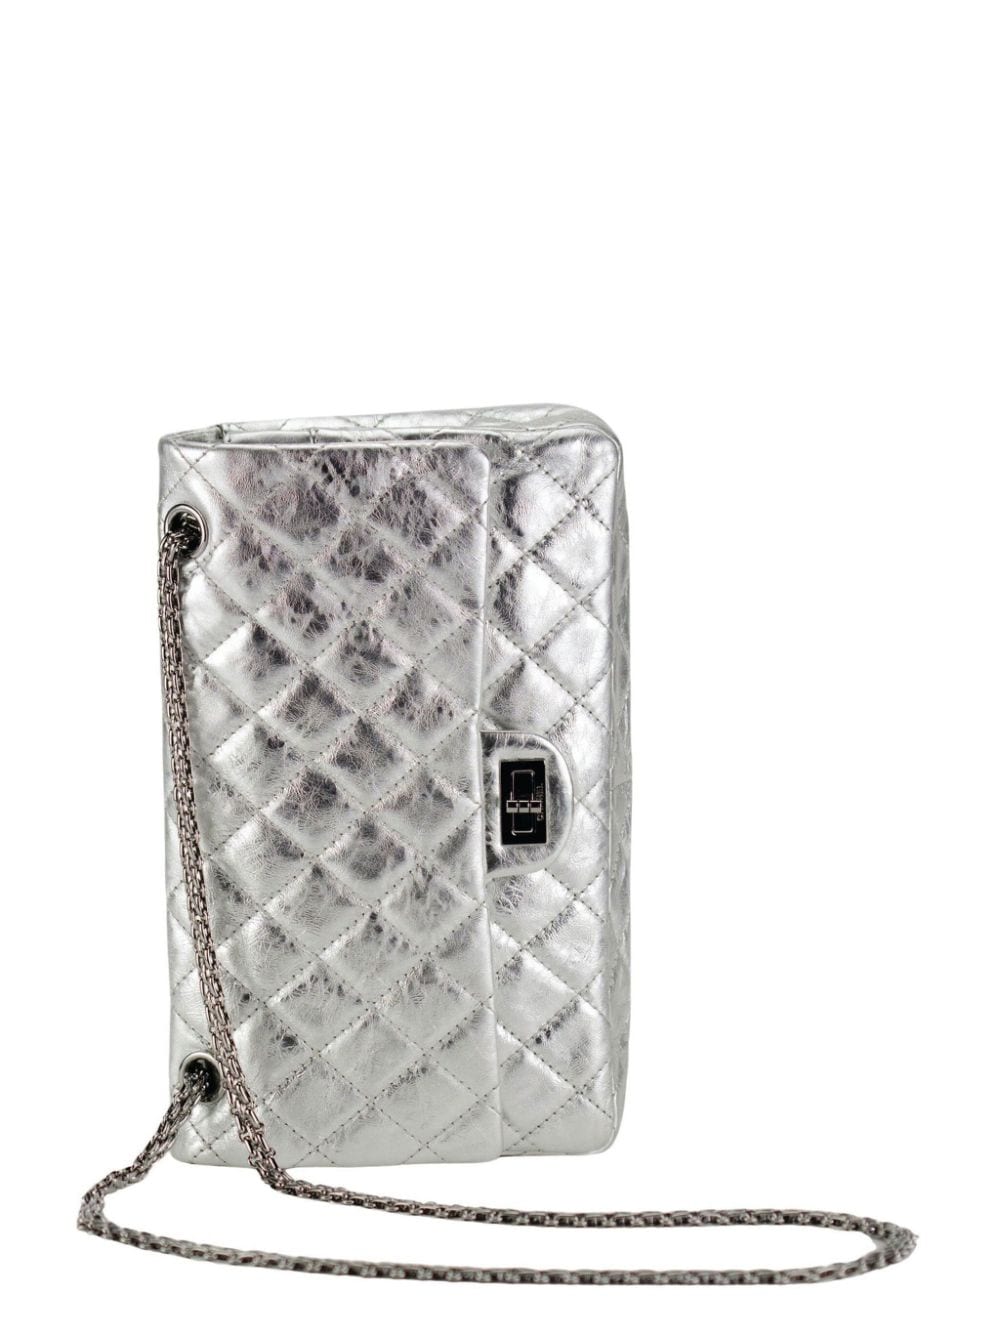 Pre-owned Chanel 2.55 Quilted Leather Shoulder Bag In Silver